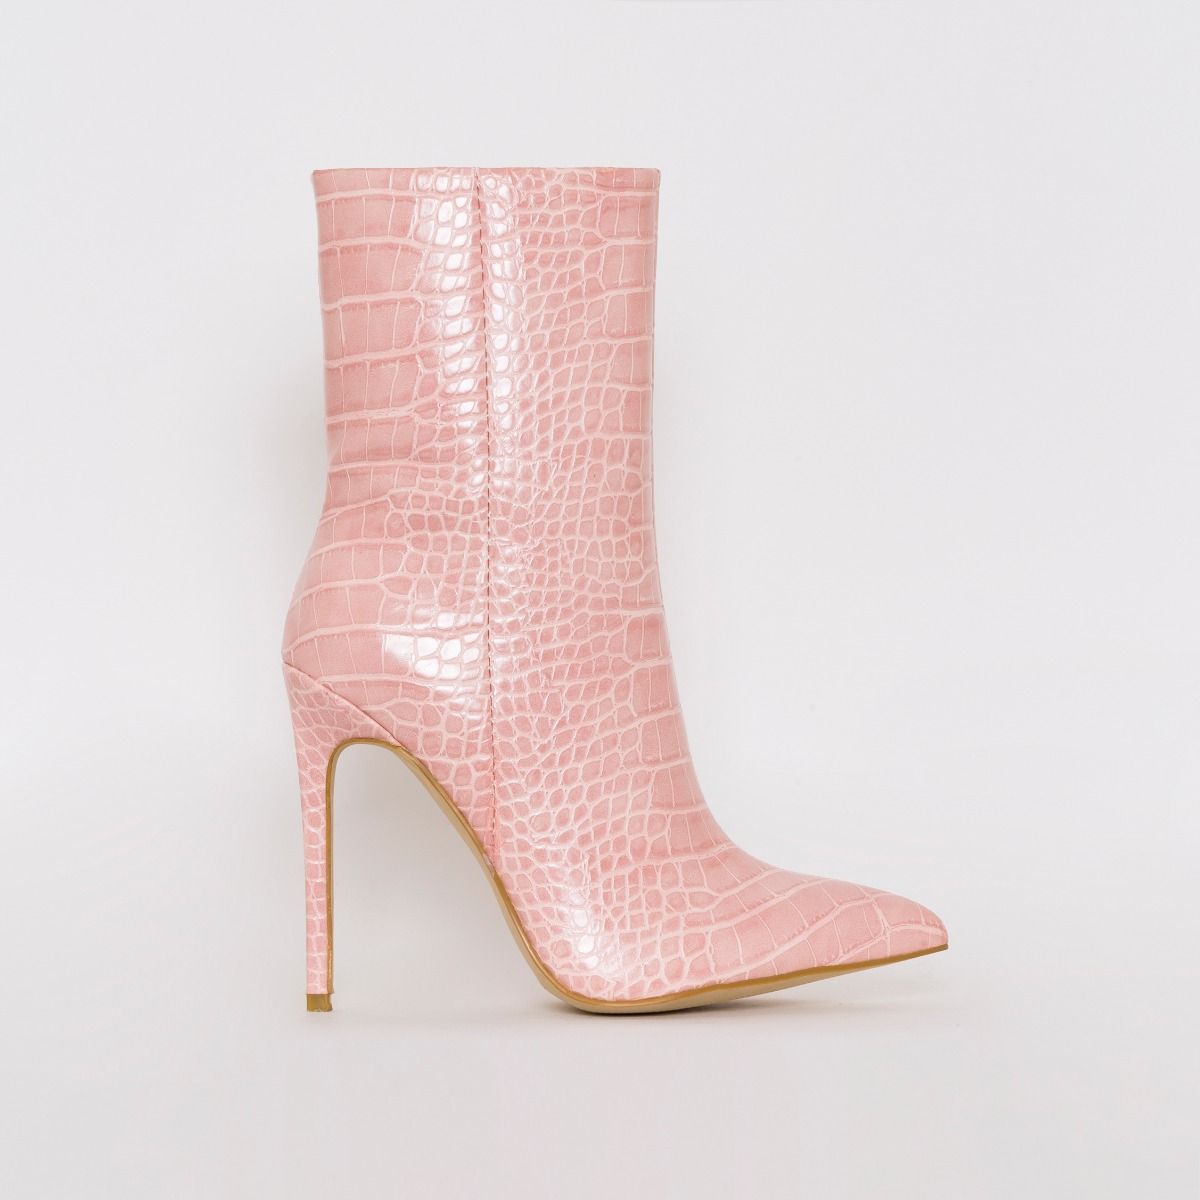 pink stiletto ankle boots